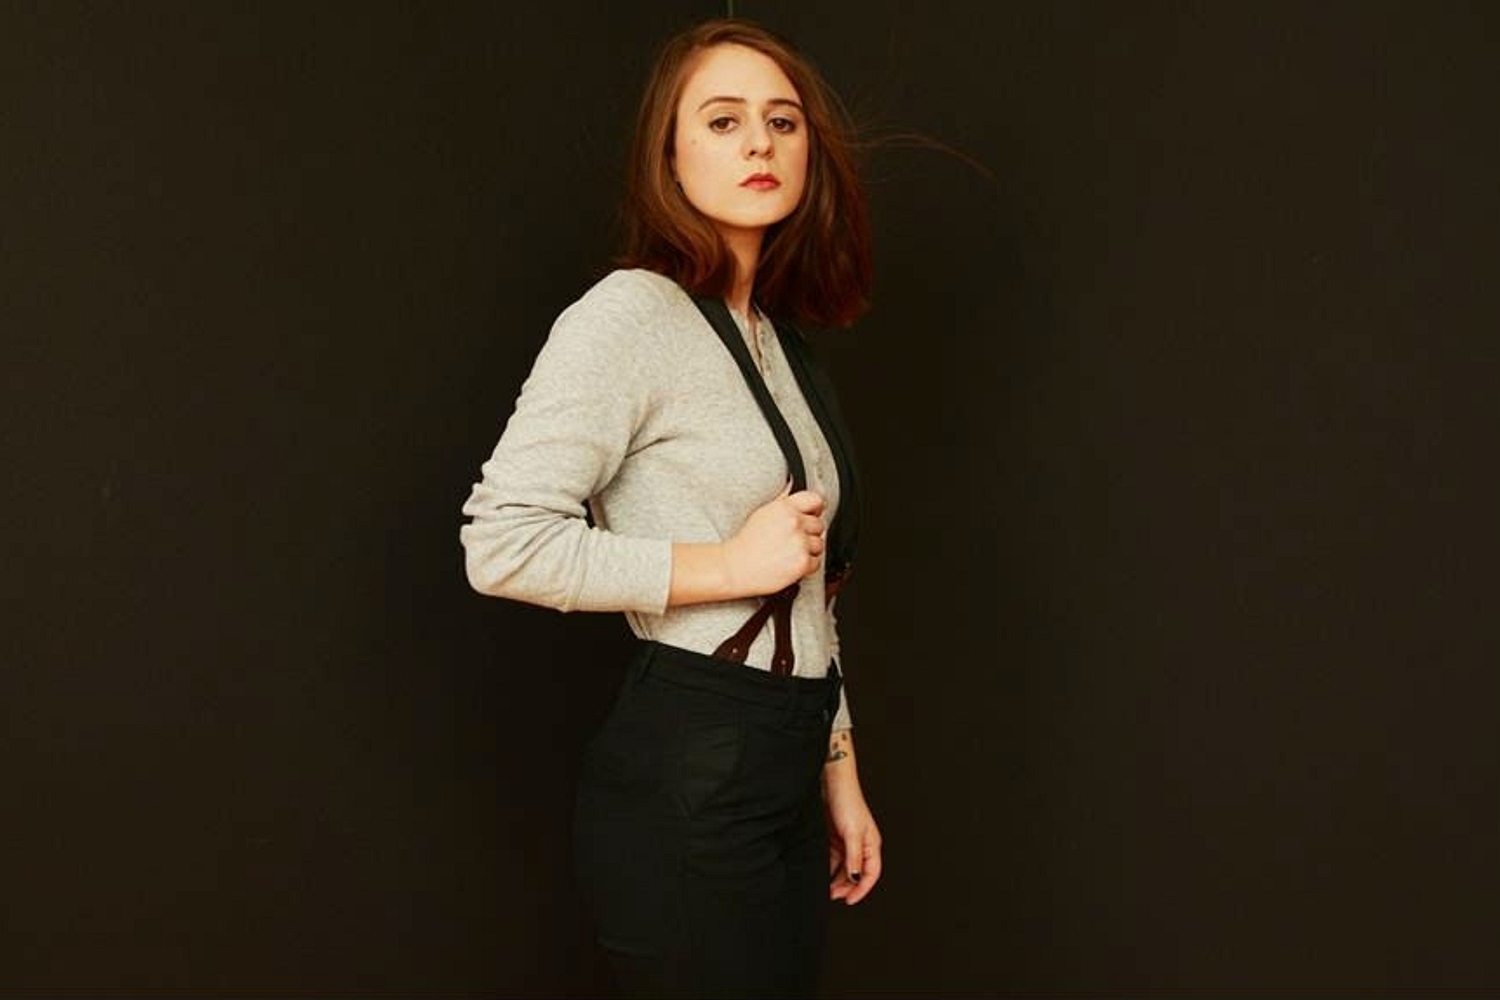 Tancred announces new album ‘Nightstand’